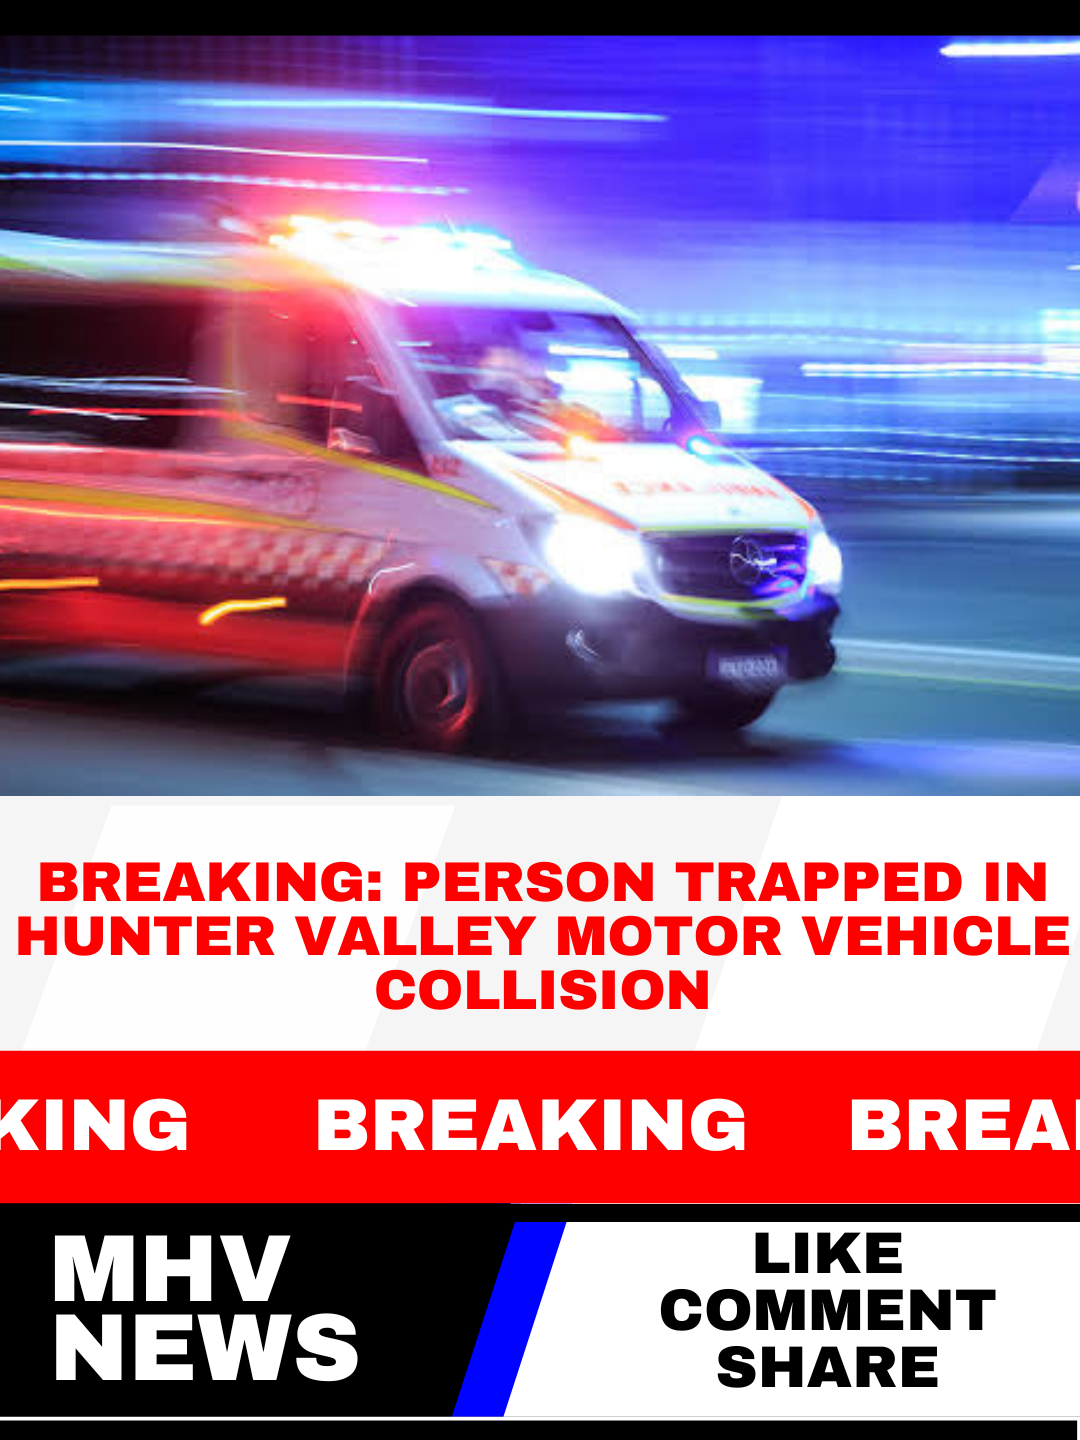 You are currently viewing Breaking: Person Trapped in Hunter Valley Motor Vehicle Collision